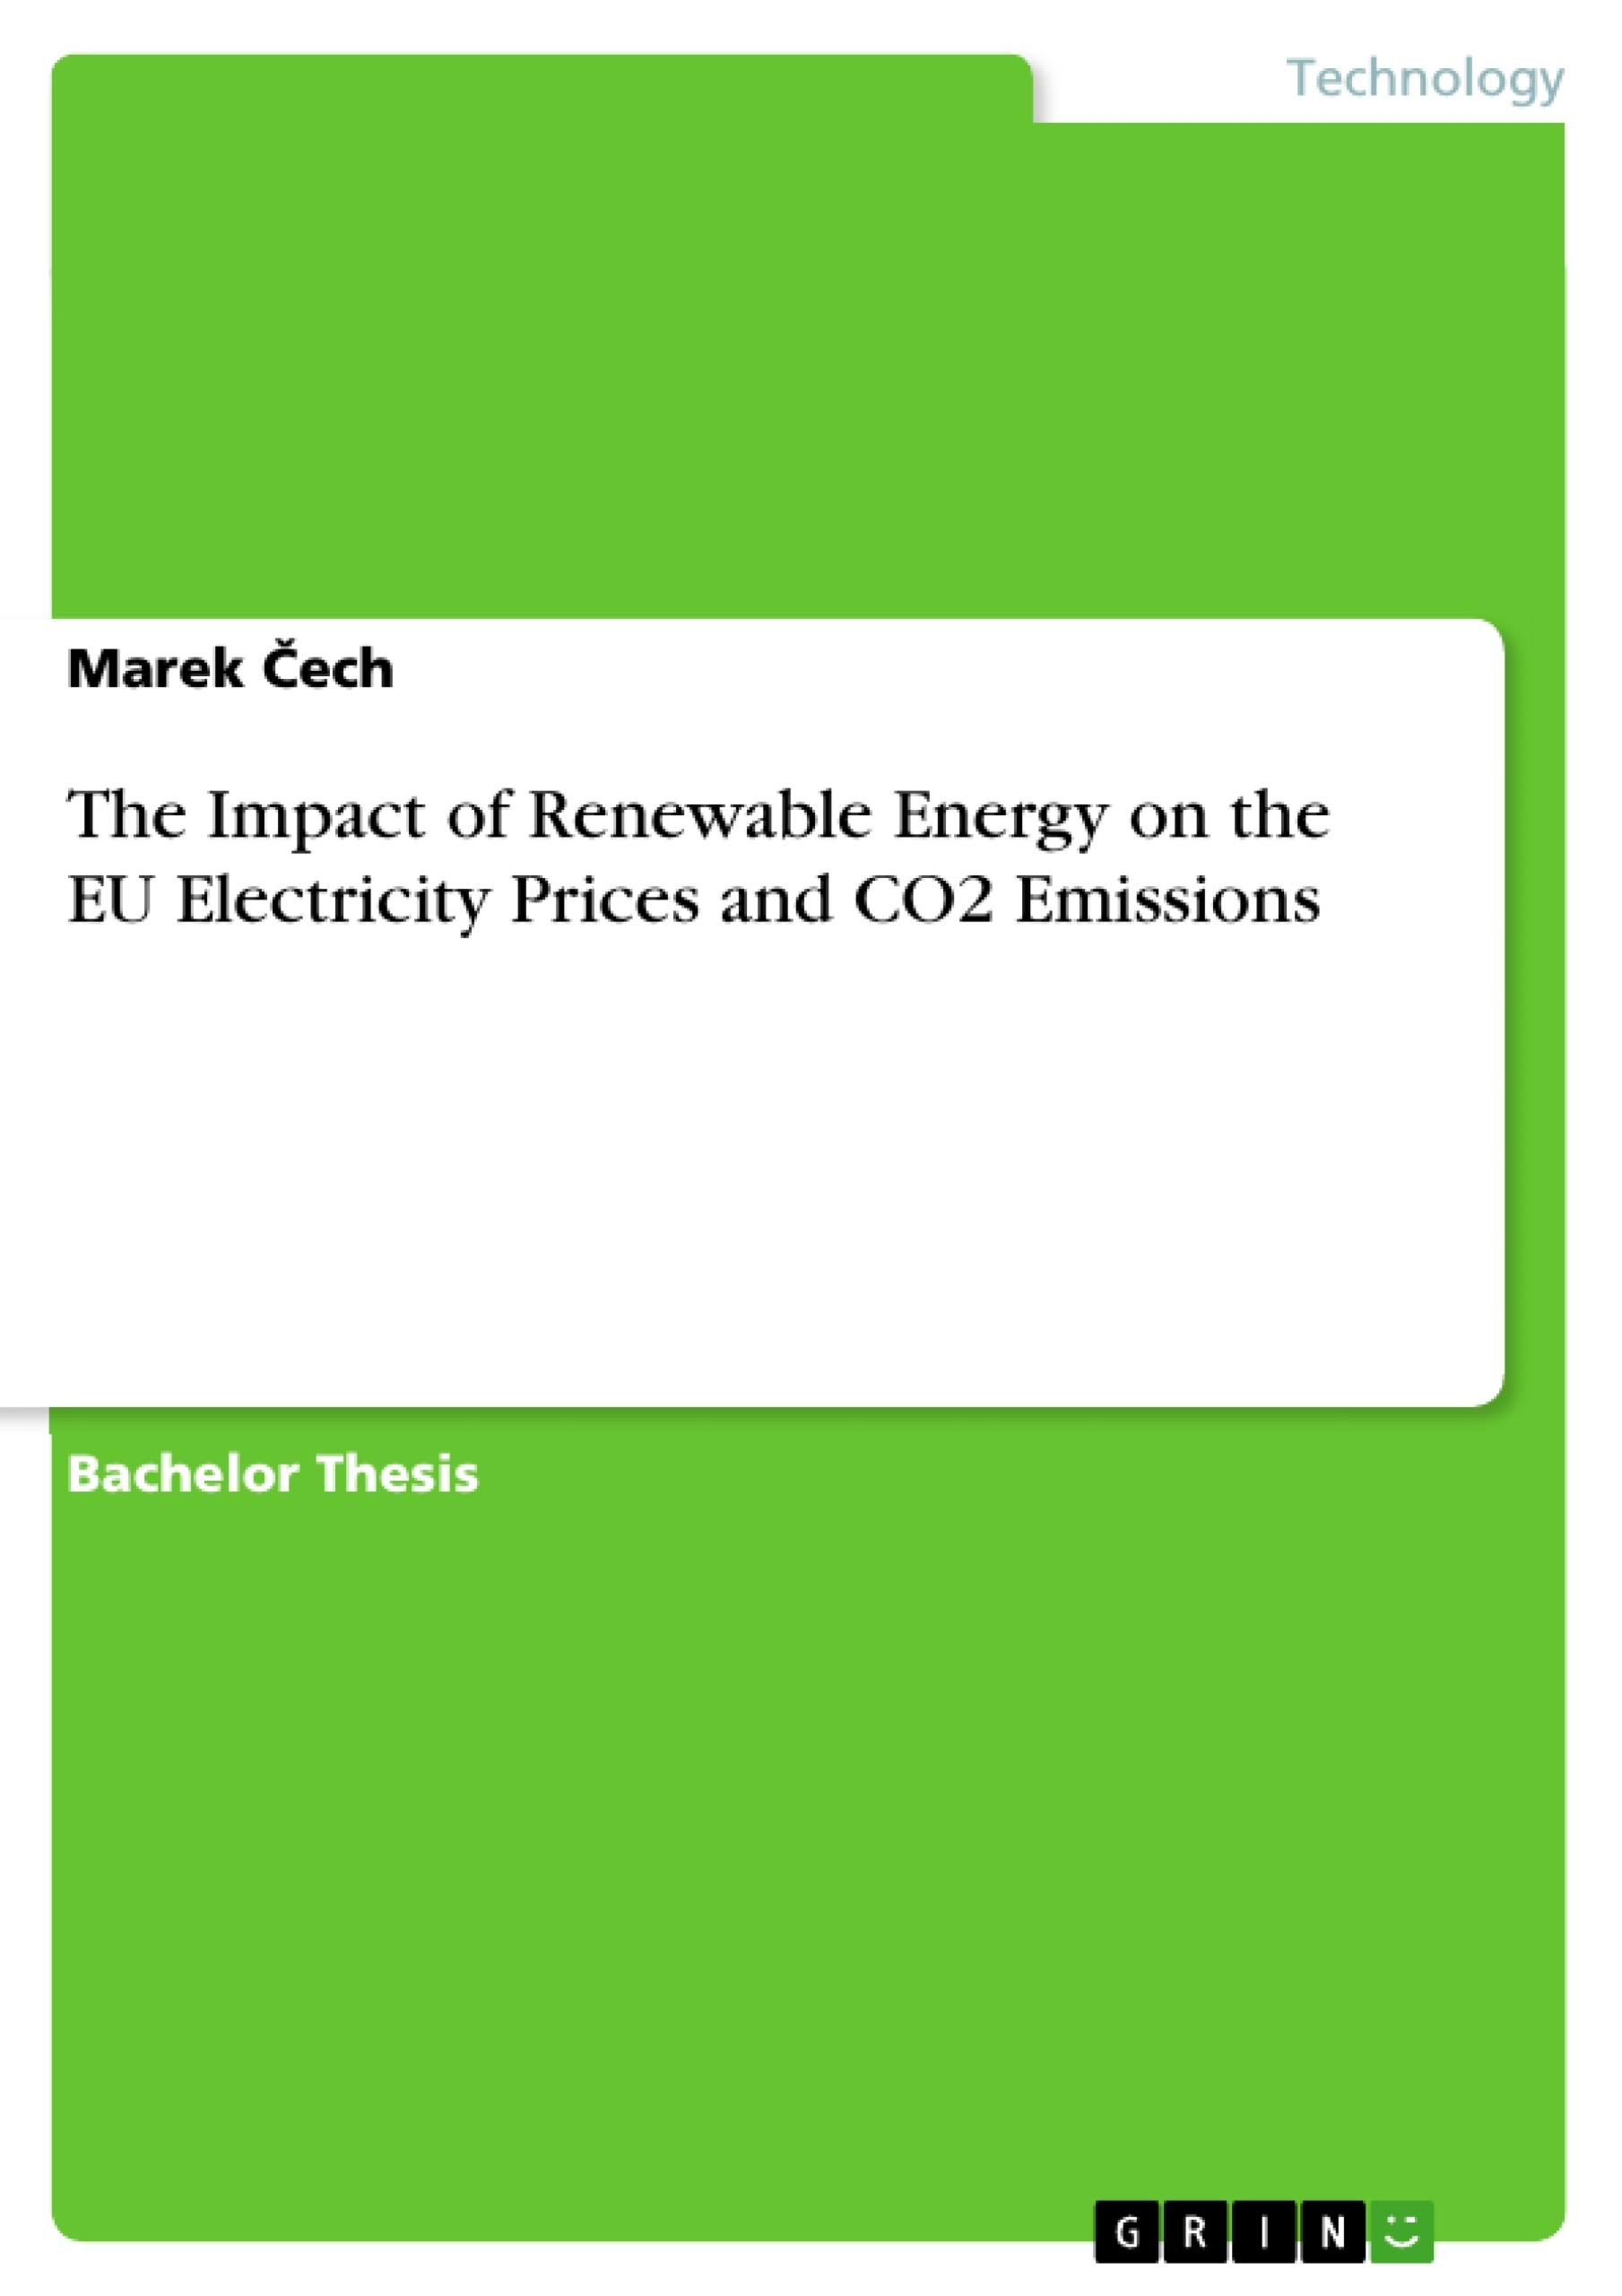 Title: The Impact of Renewable Energy on the EU Electricity Prices and CO2 Emissions